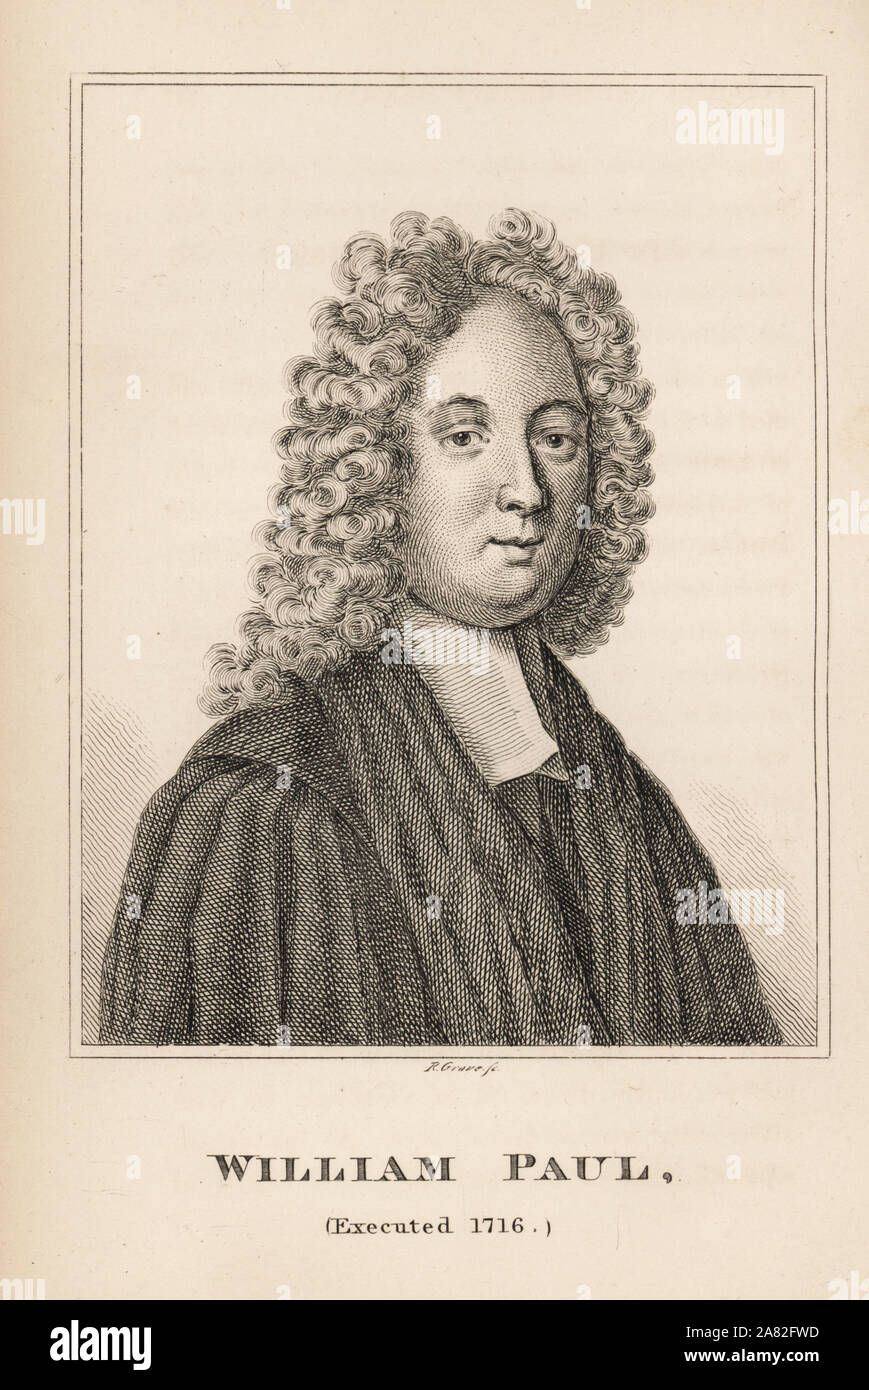 Reverend William Paul, rebel supporter executed for treason at Tyburn, 1716. Engraving by R. Grave from James Caulfield's Portraits, Memoirs and Characters of Remarkable Persons, London, 1819. Stock Photo